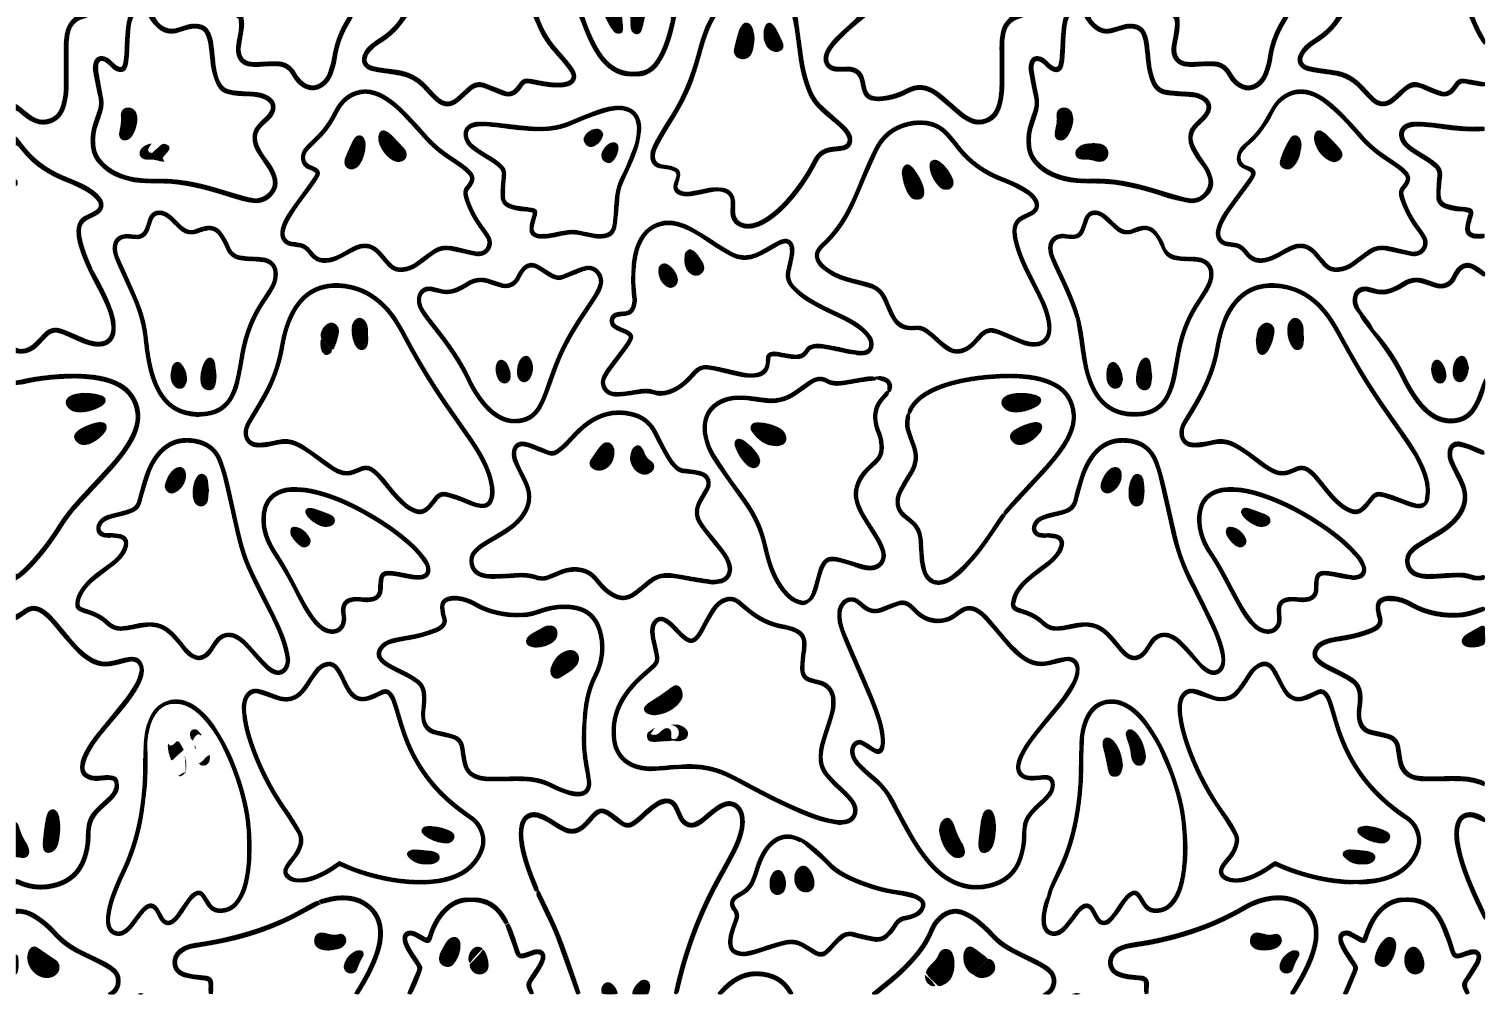 Pattern Ghost Coloring Page from Ghost